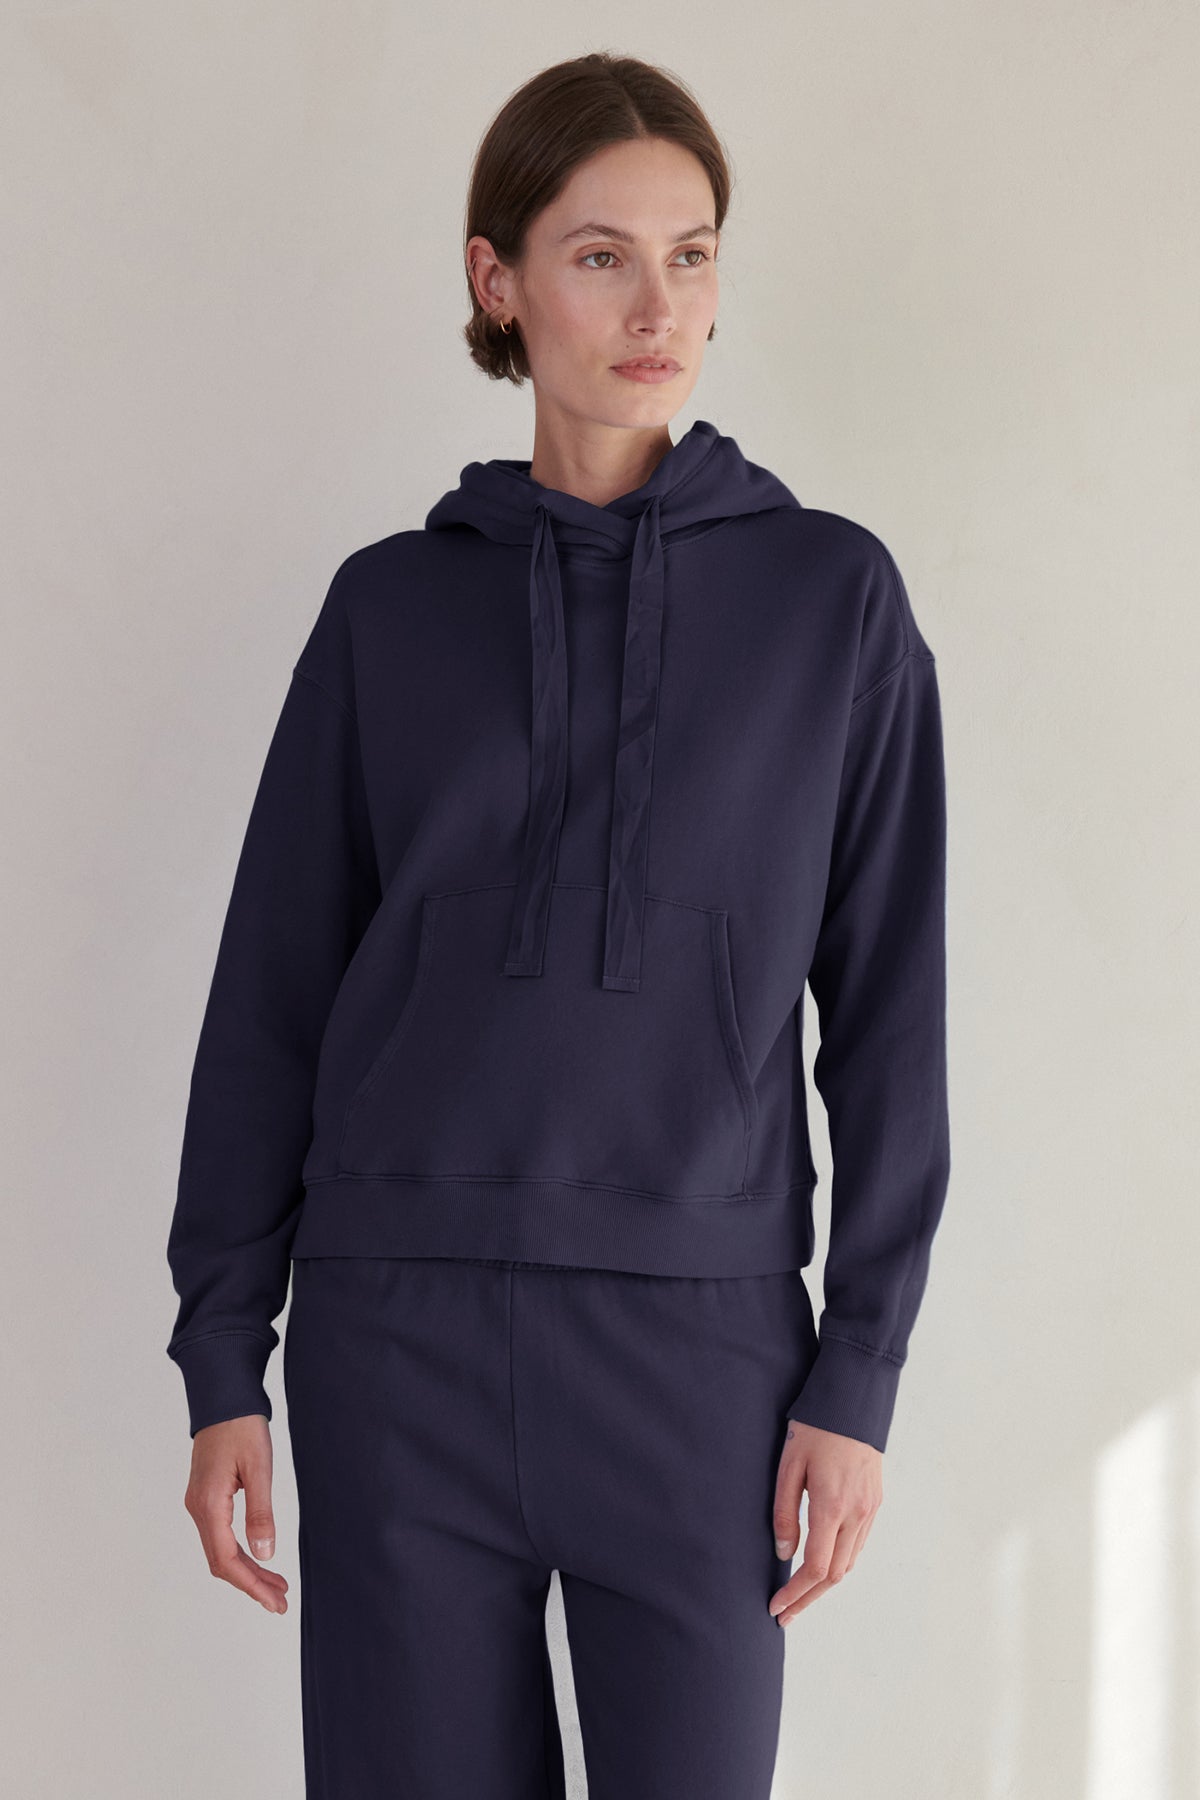 Fear of God ESSENTIALS Cozies up This Holiday 2019 in Fleeces, Hoodies &  Sweatpants